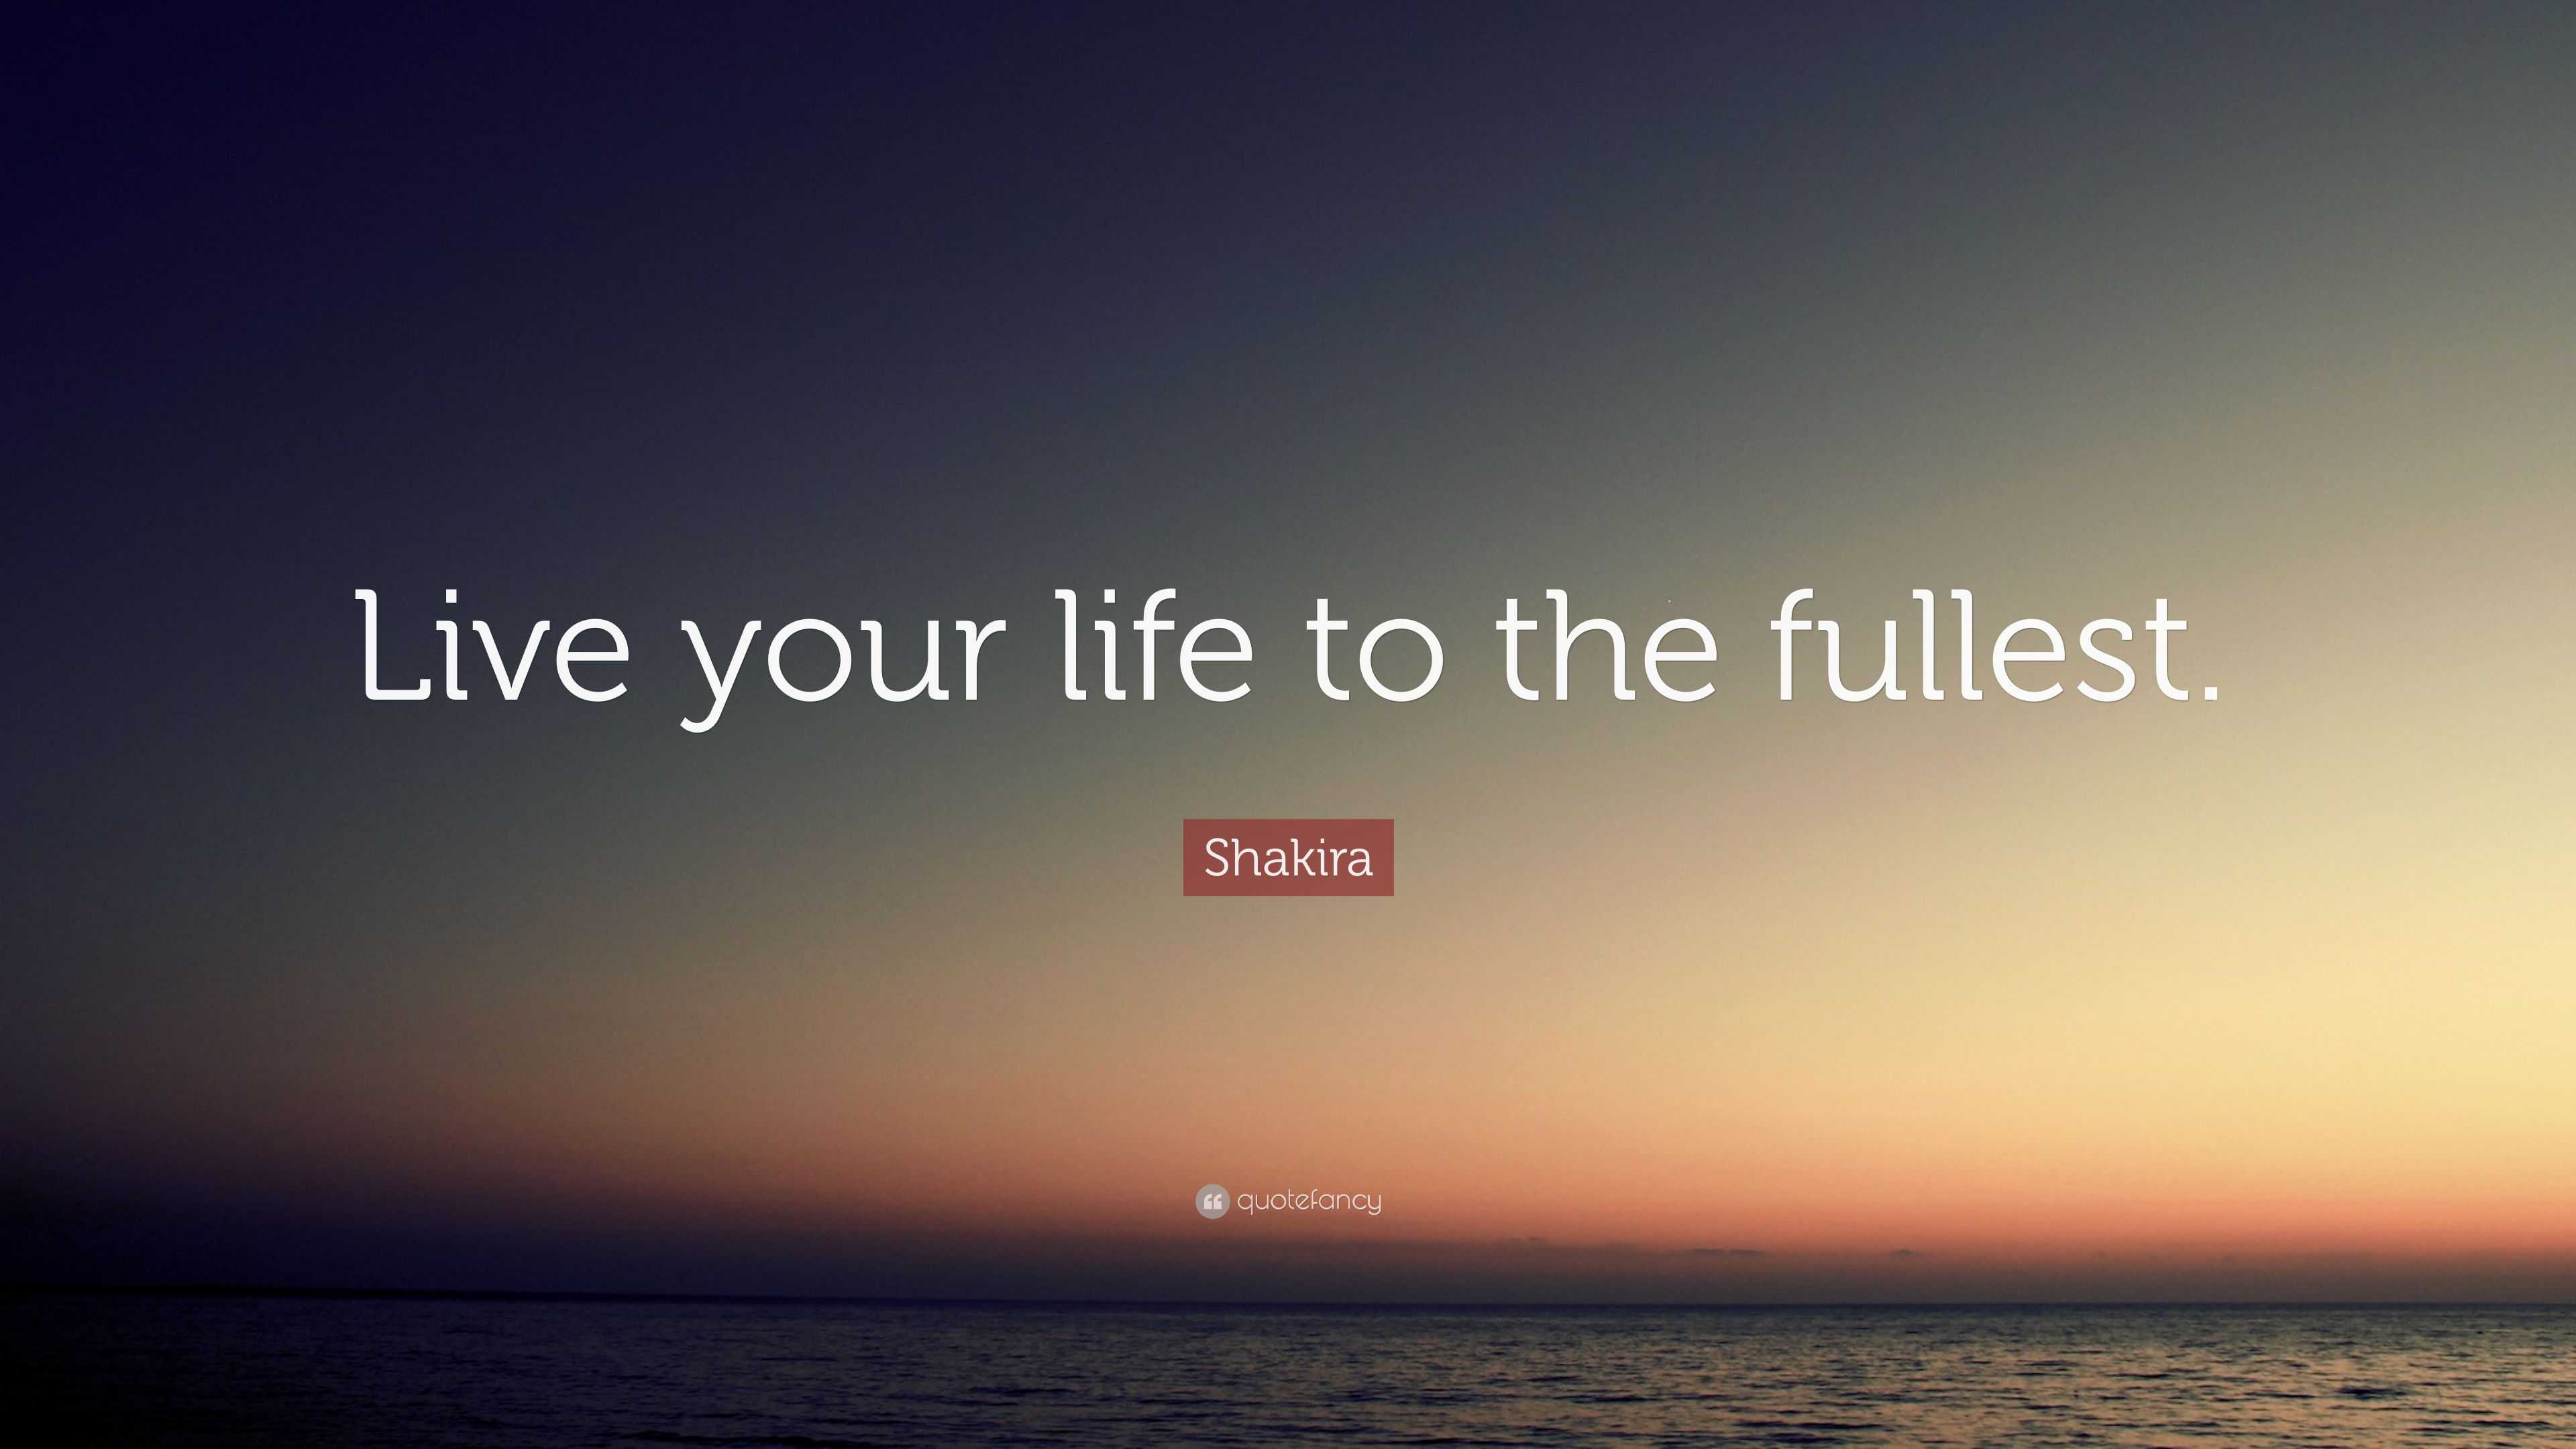 Shakira Quote: “Live your life to the fullest.”